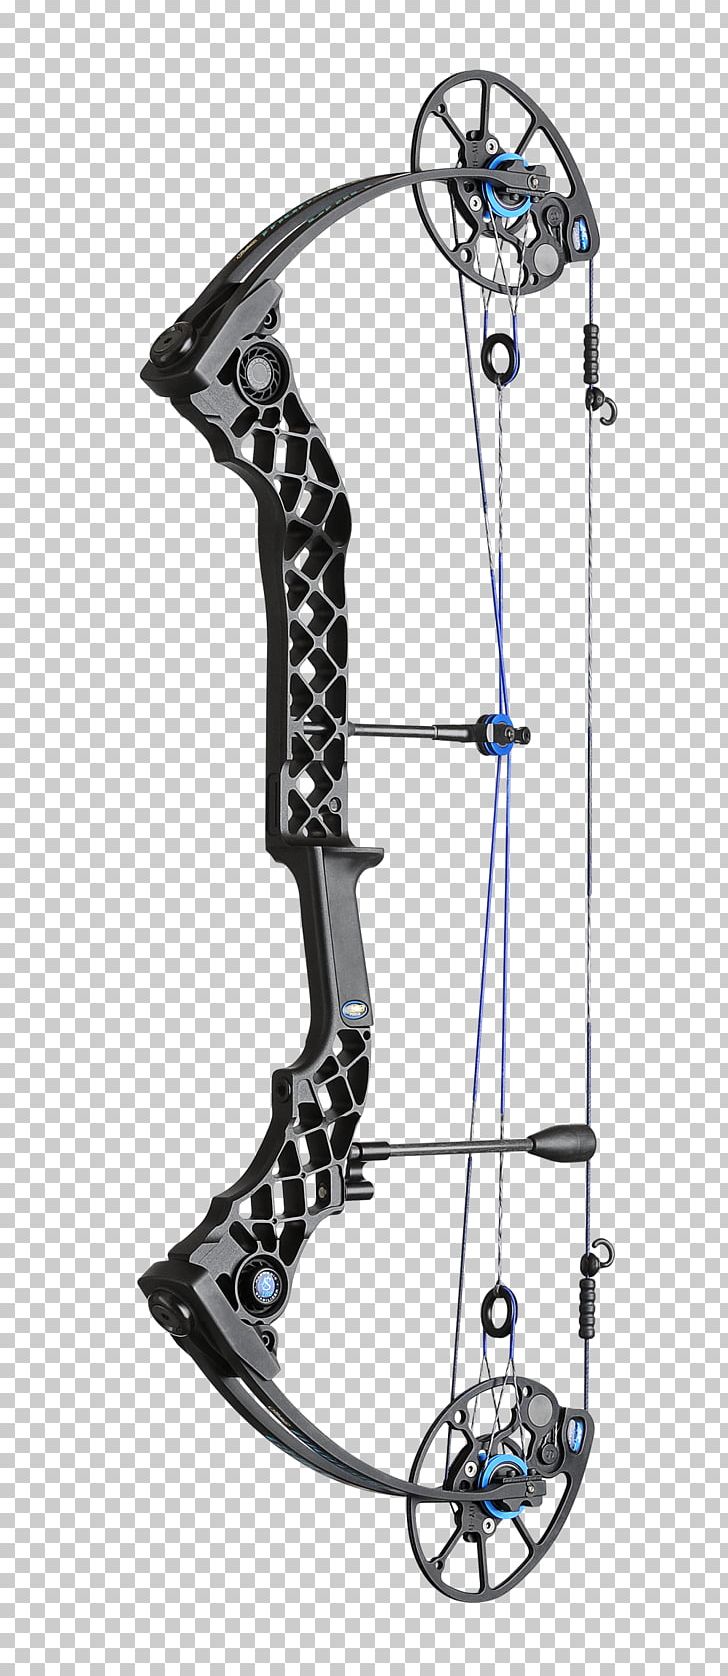 Mathews Archery PNG, Clipart, Archery, Arrow, Bow, Bow And Arrow, Bowhunting Free PNG Download